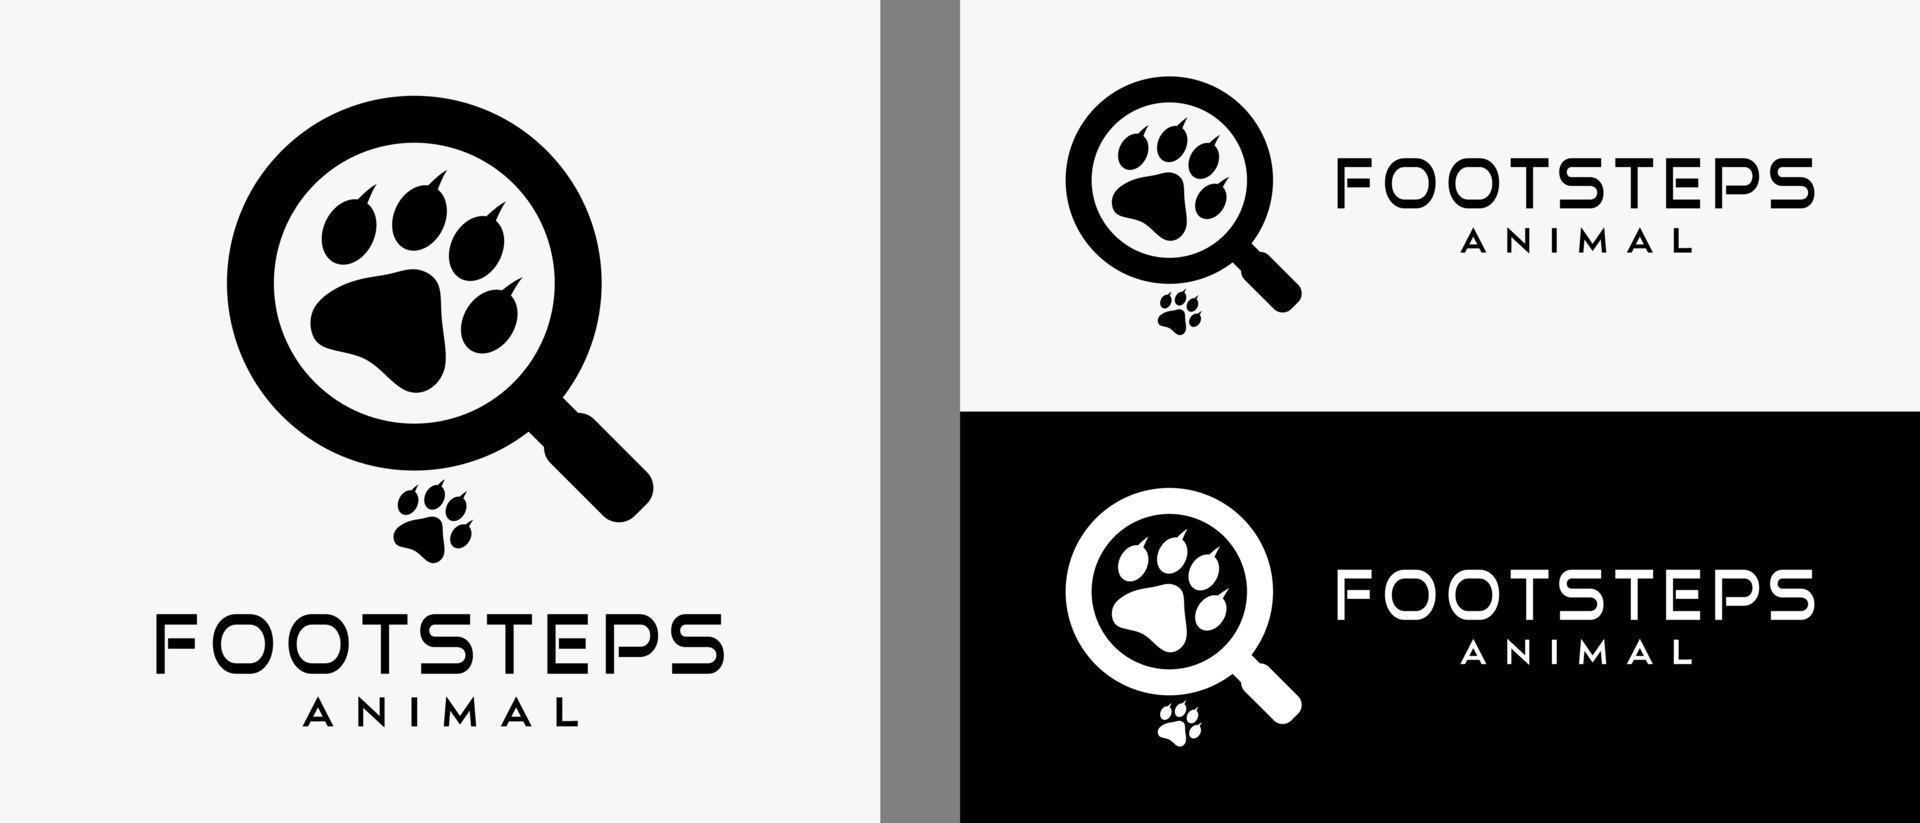 Animal footprints, lion, tiger or cat footprints logo design templates and magnifying glass icons with creative concepts. premium vector logo illustration